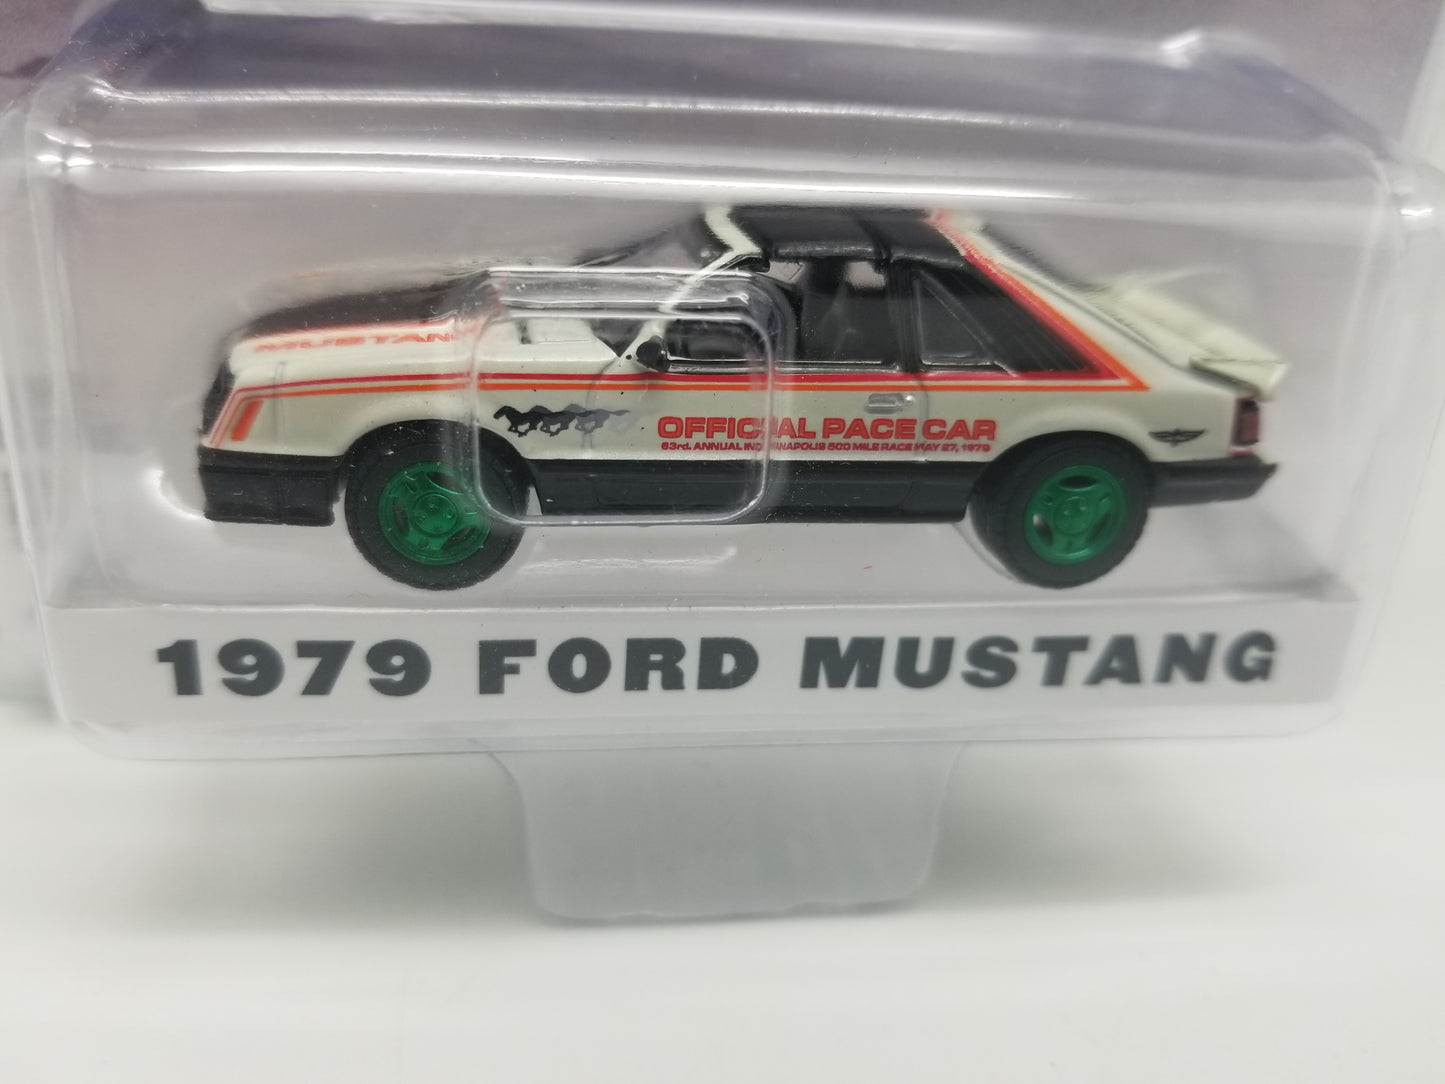 GL CHASE - 1979 Ford Mustang Indianapolis Motor Speedway Pace Car